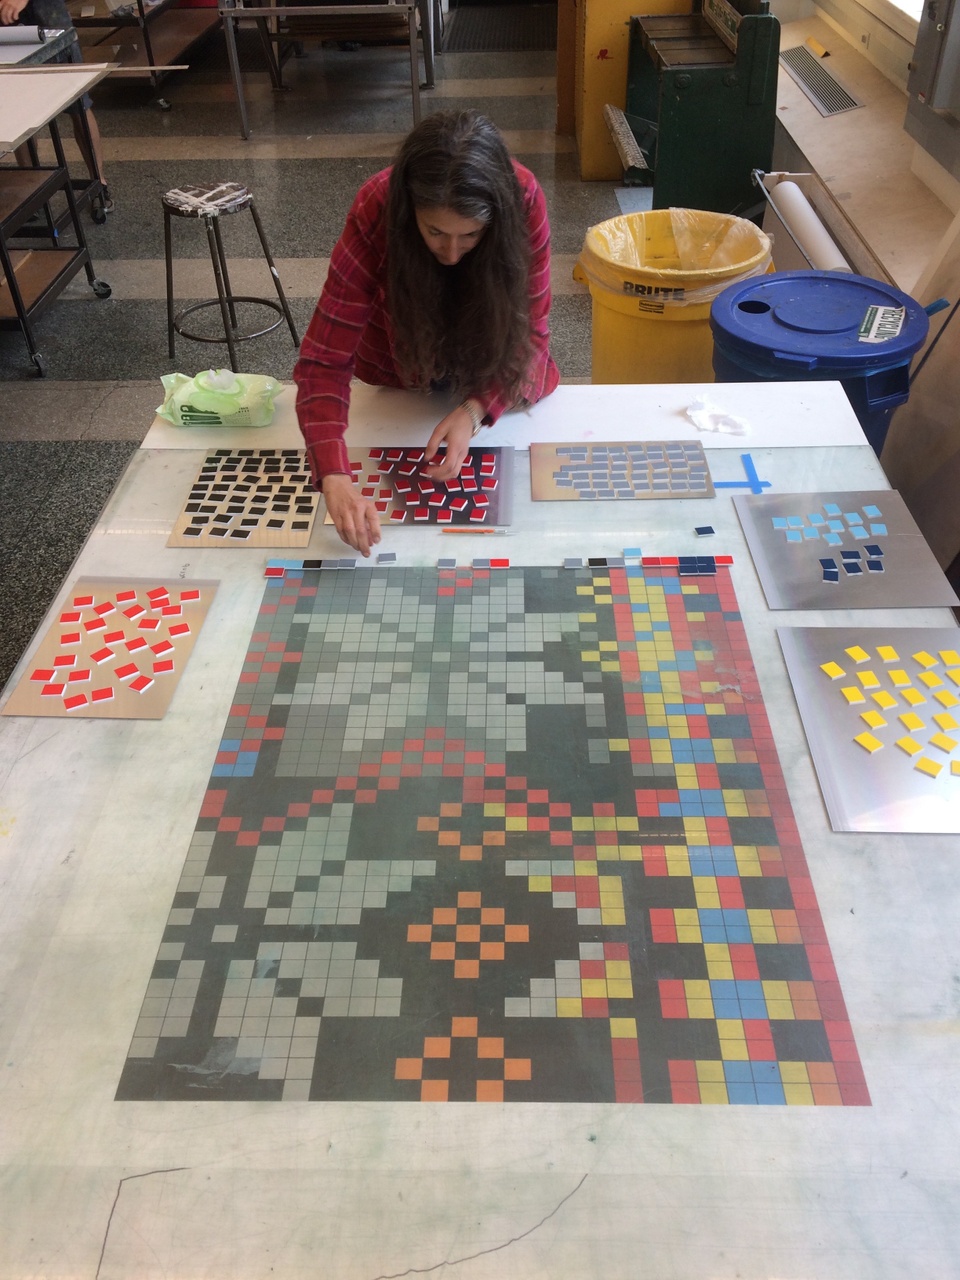 Lisa Anne Auerbach on the press placing tiles for printing Snowflake.